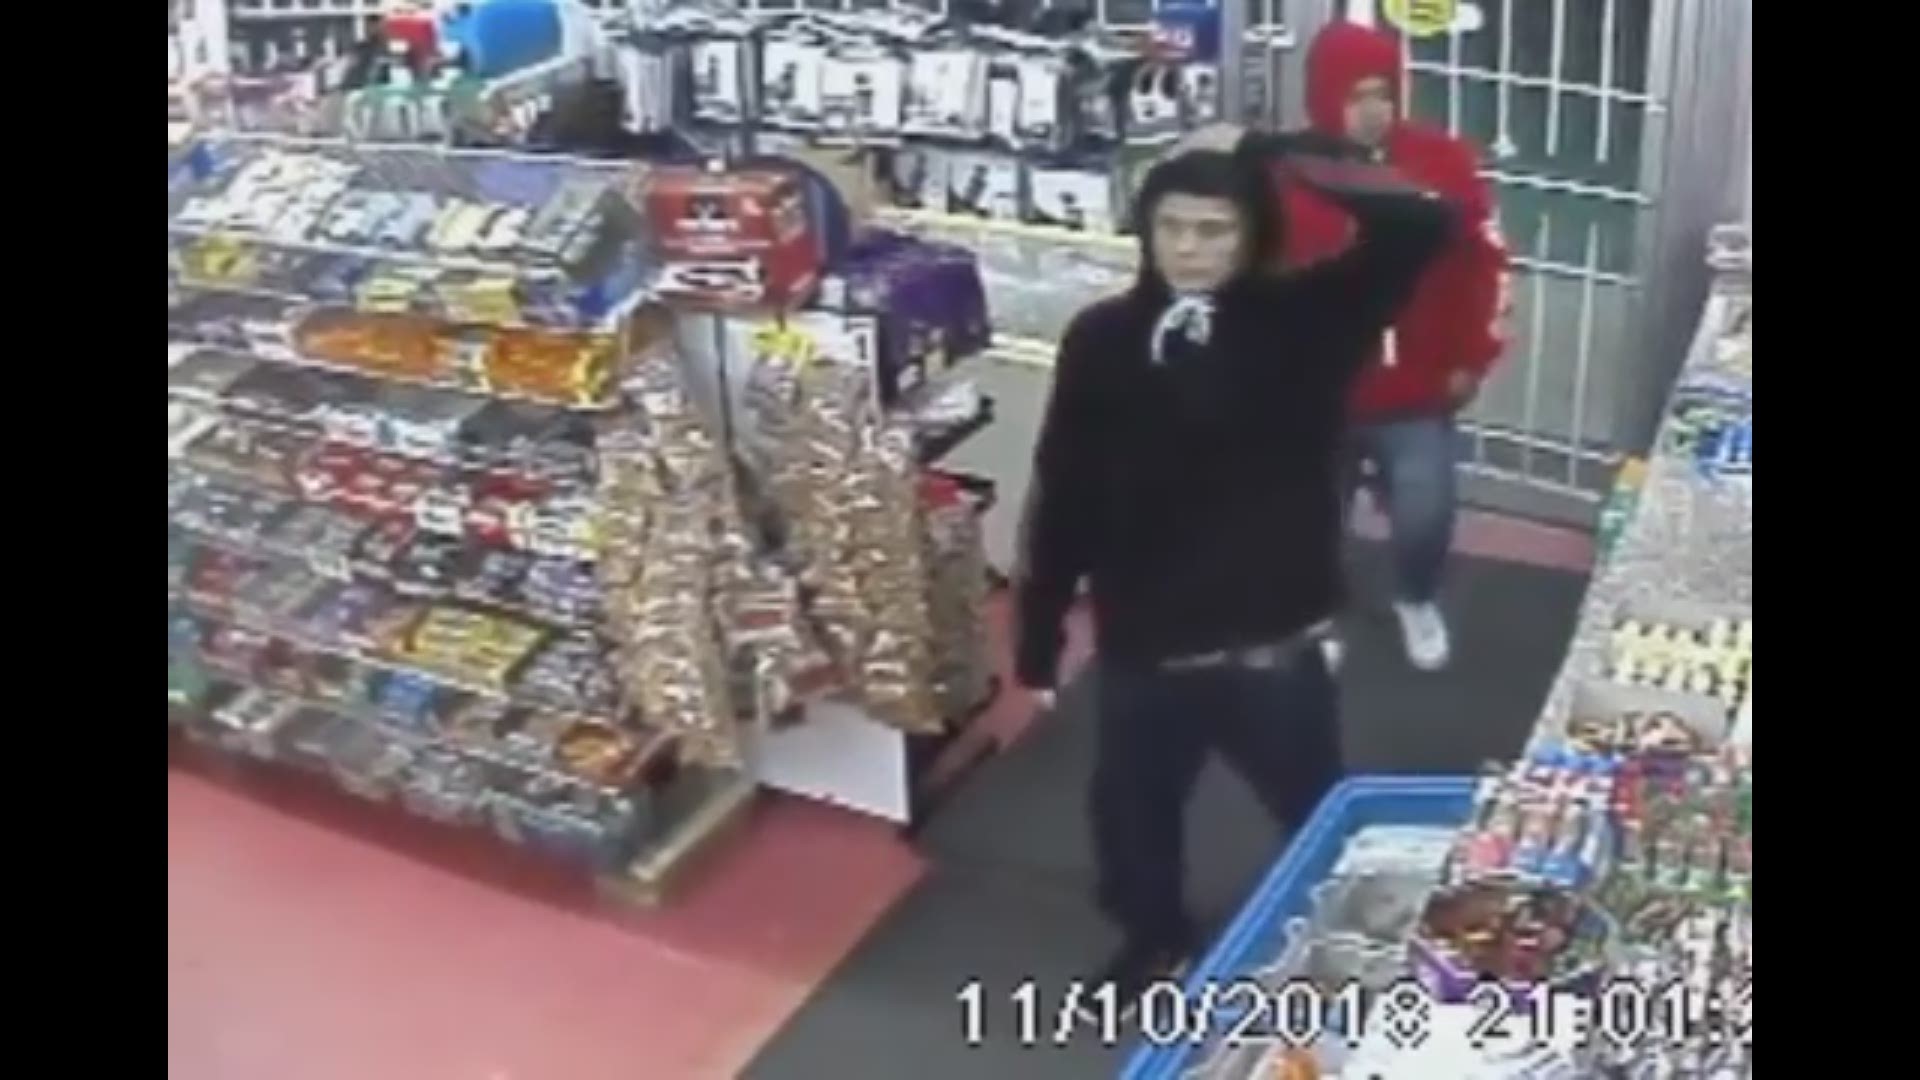 Police are looking for two suspects who shot and killed a convenience store employee in northwest Houston on Nov. 10.